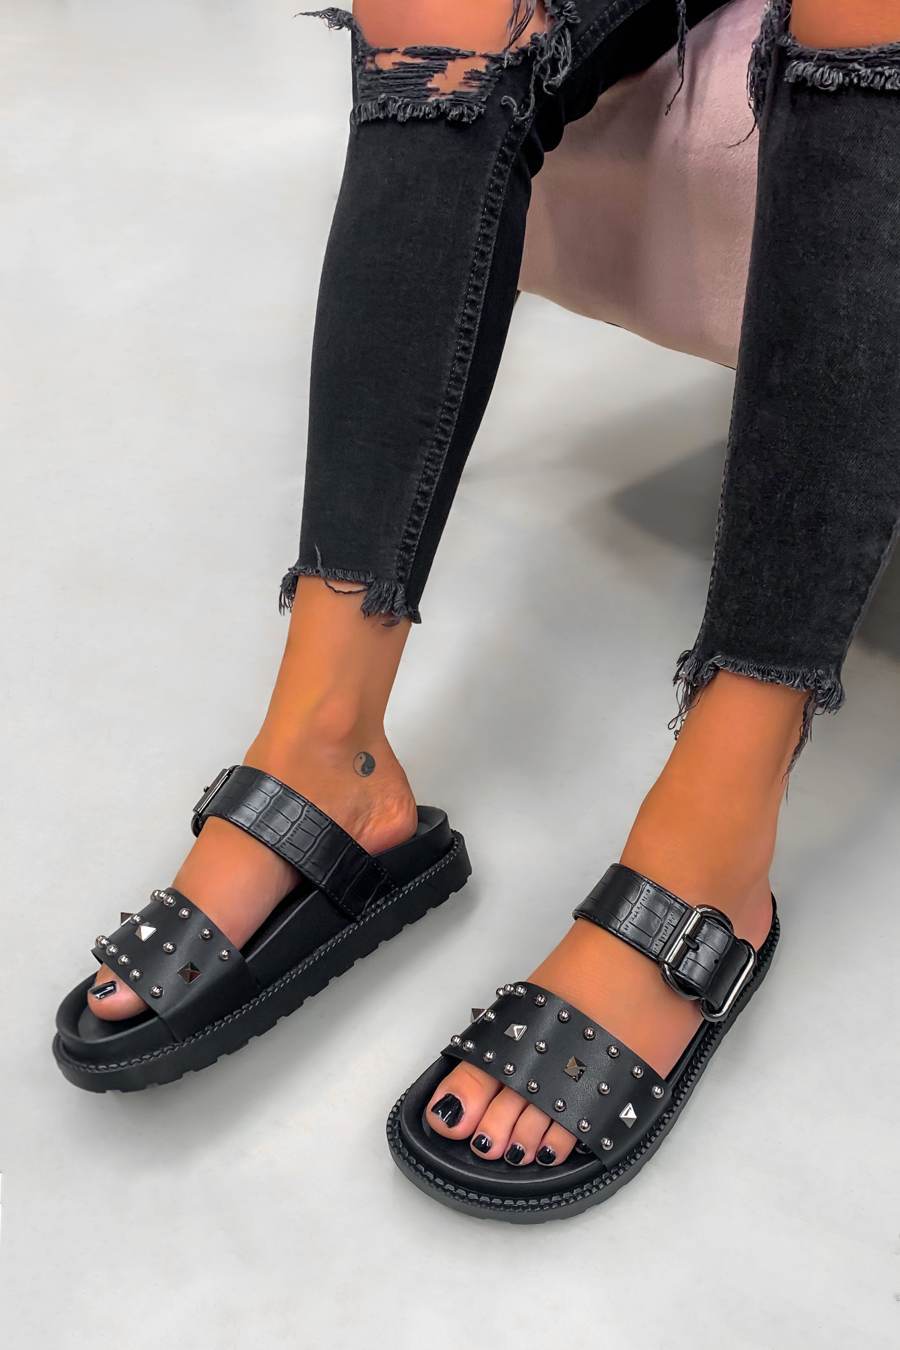 TOLD YOU Chunky Studded Buckle Sandals - Black Croc – AJ VOYAGE